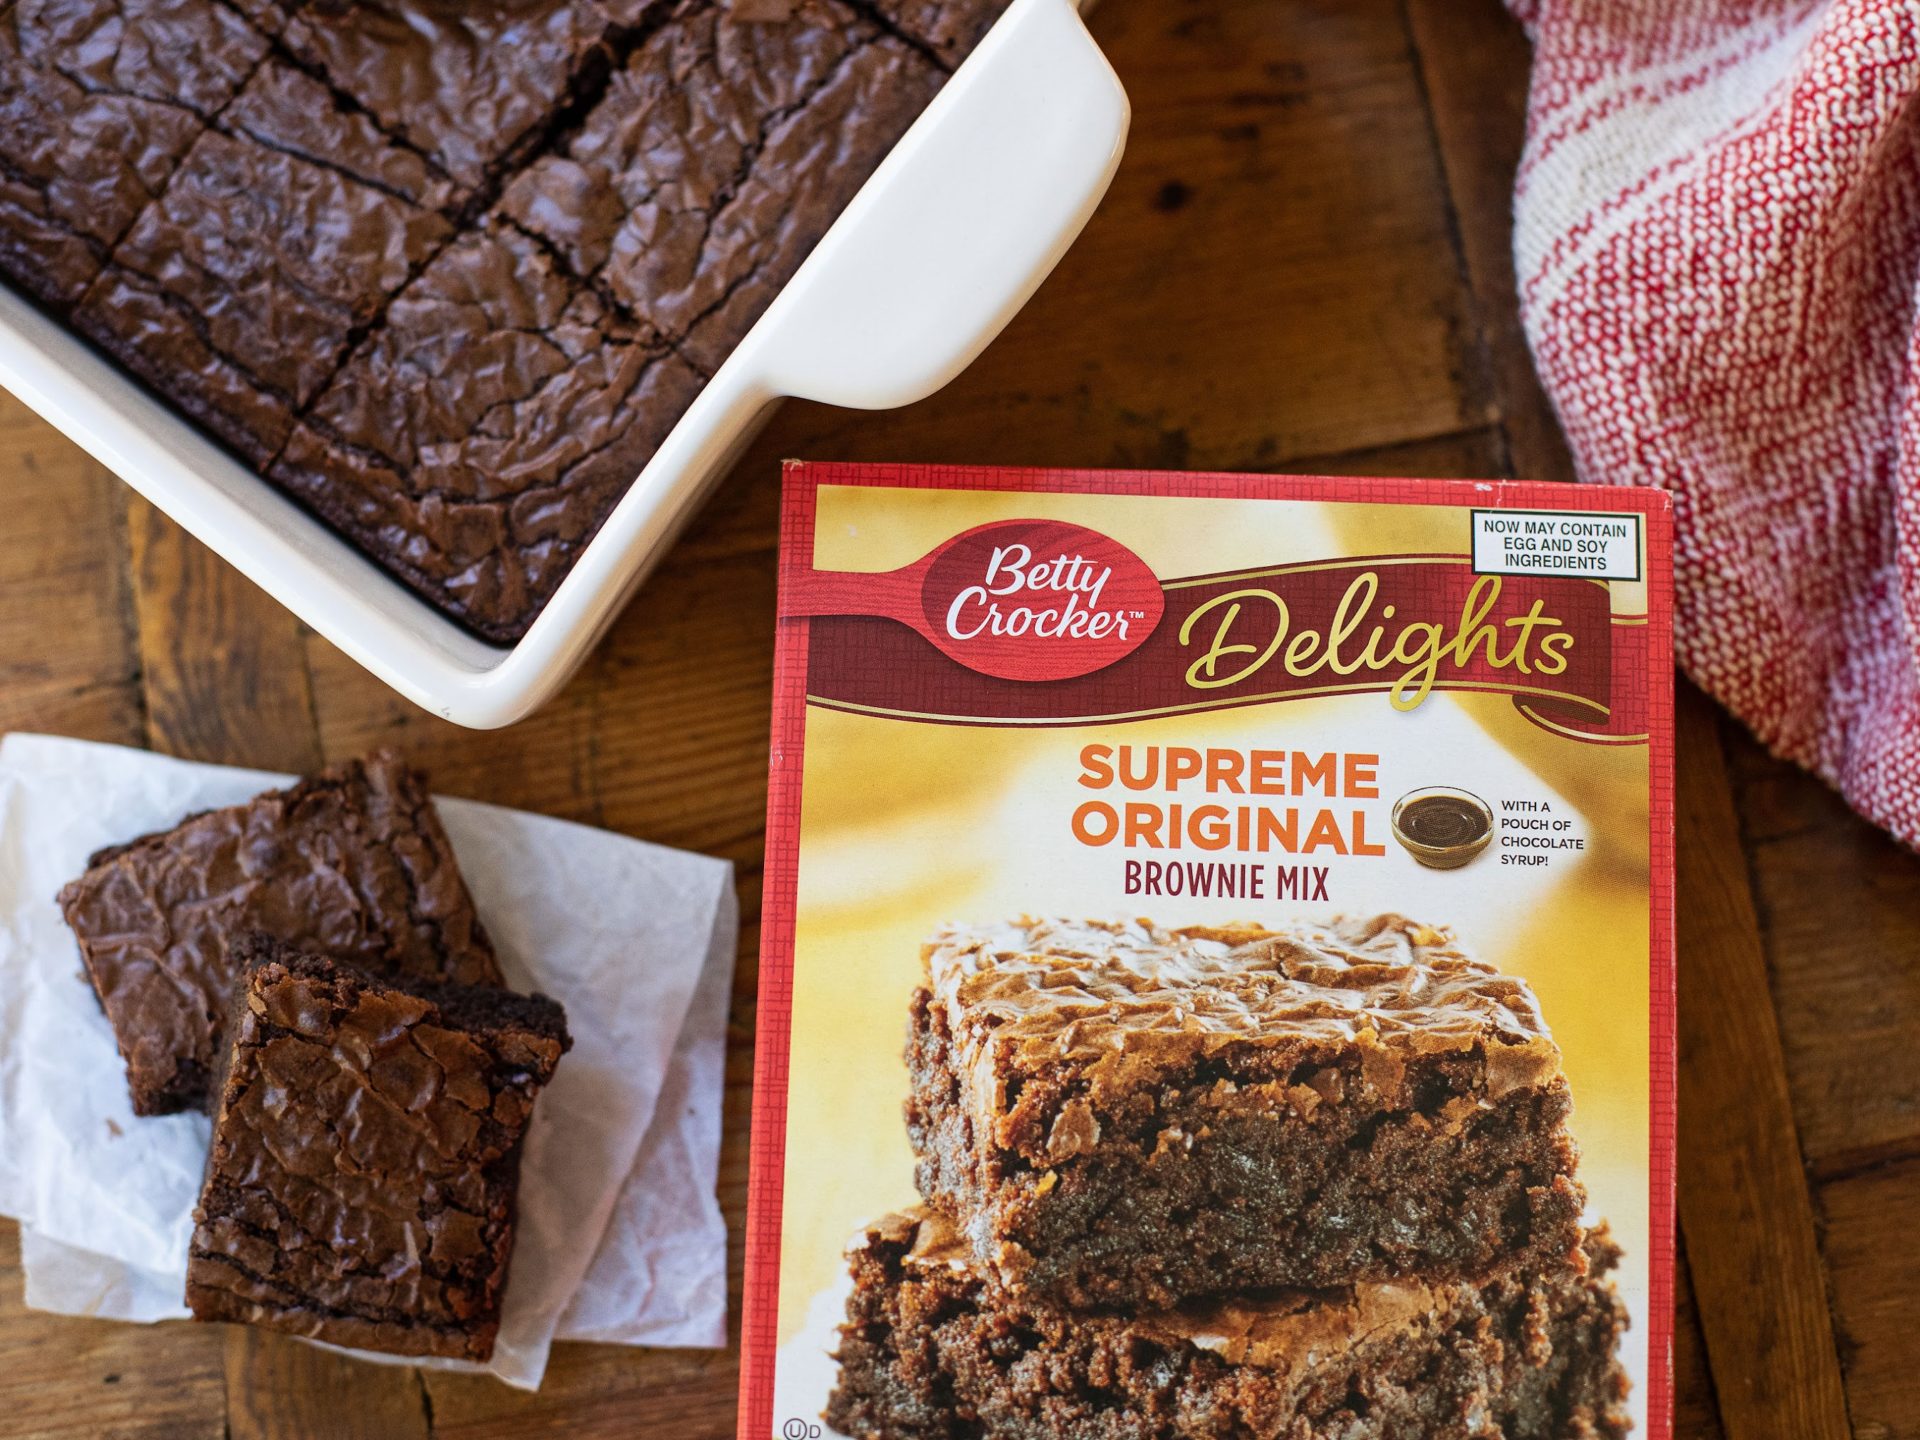 Grab A Deal On Betty Crocker Brownie Mix or Cookie Mix – Just $1.49 At Kroger